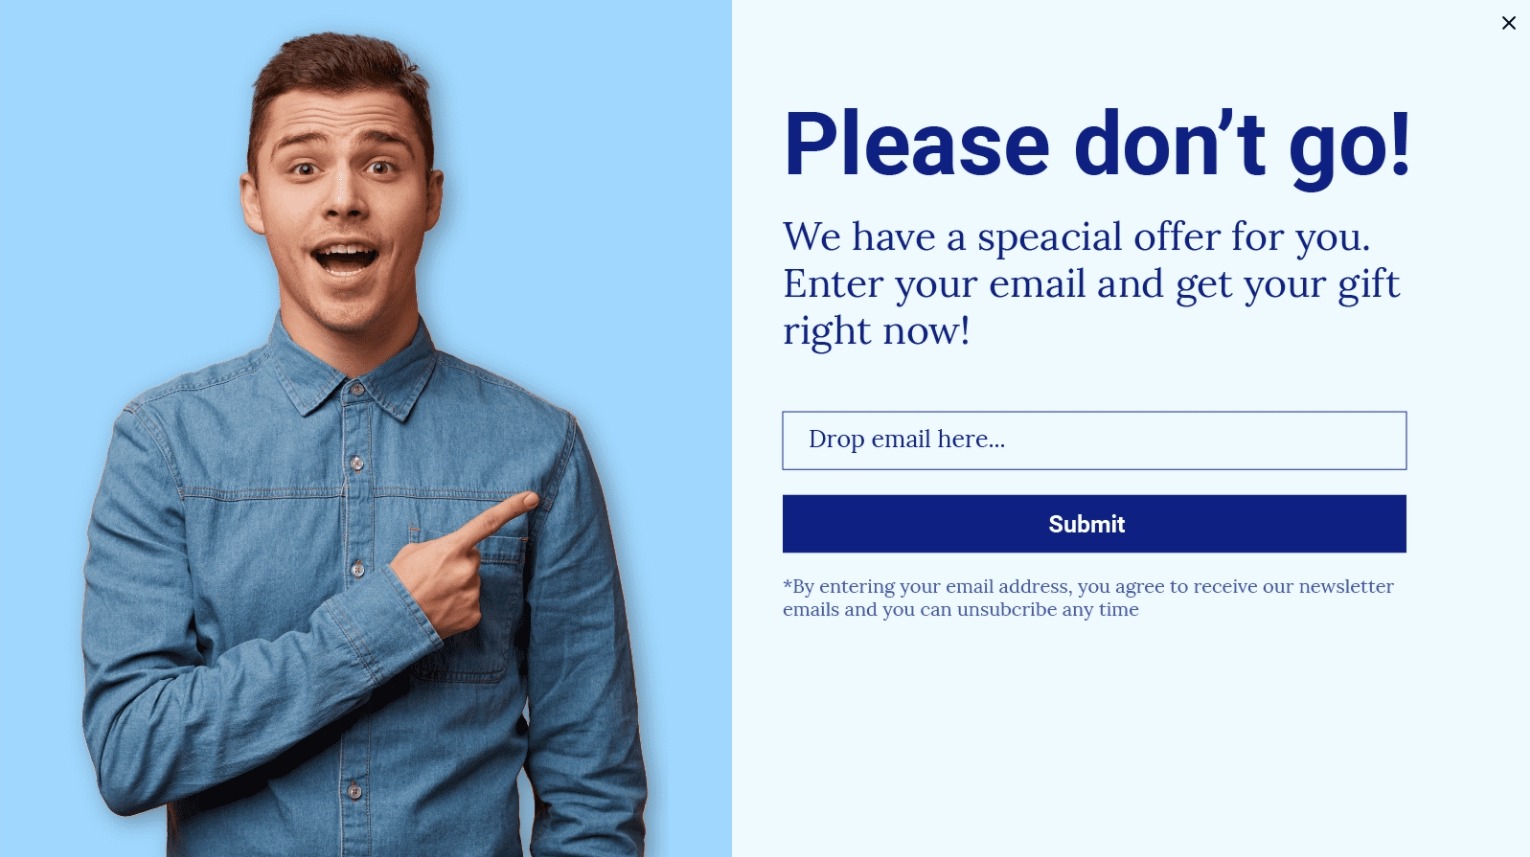 How to use an opt-in email